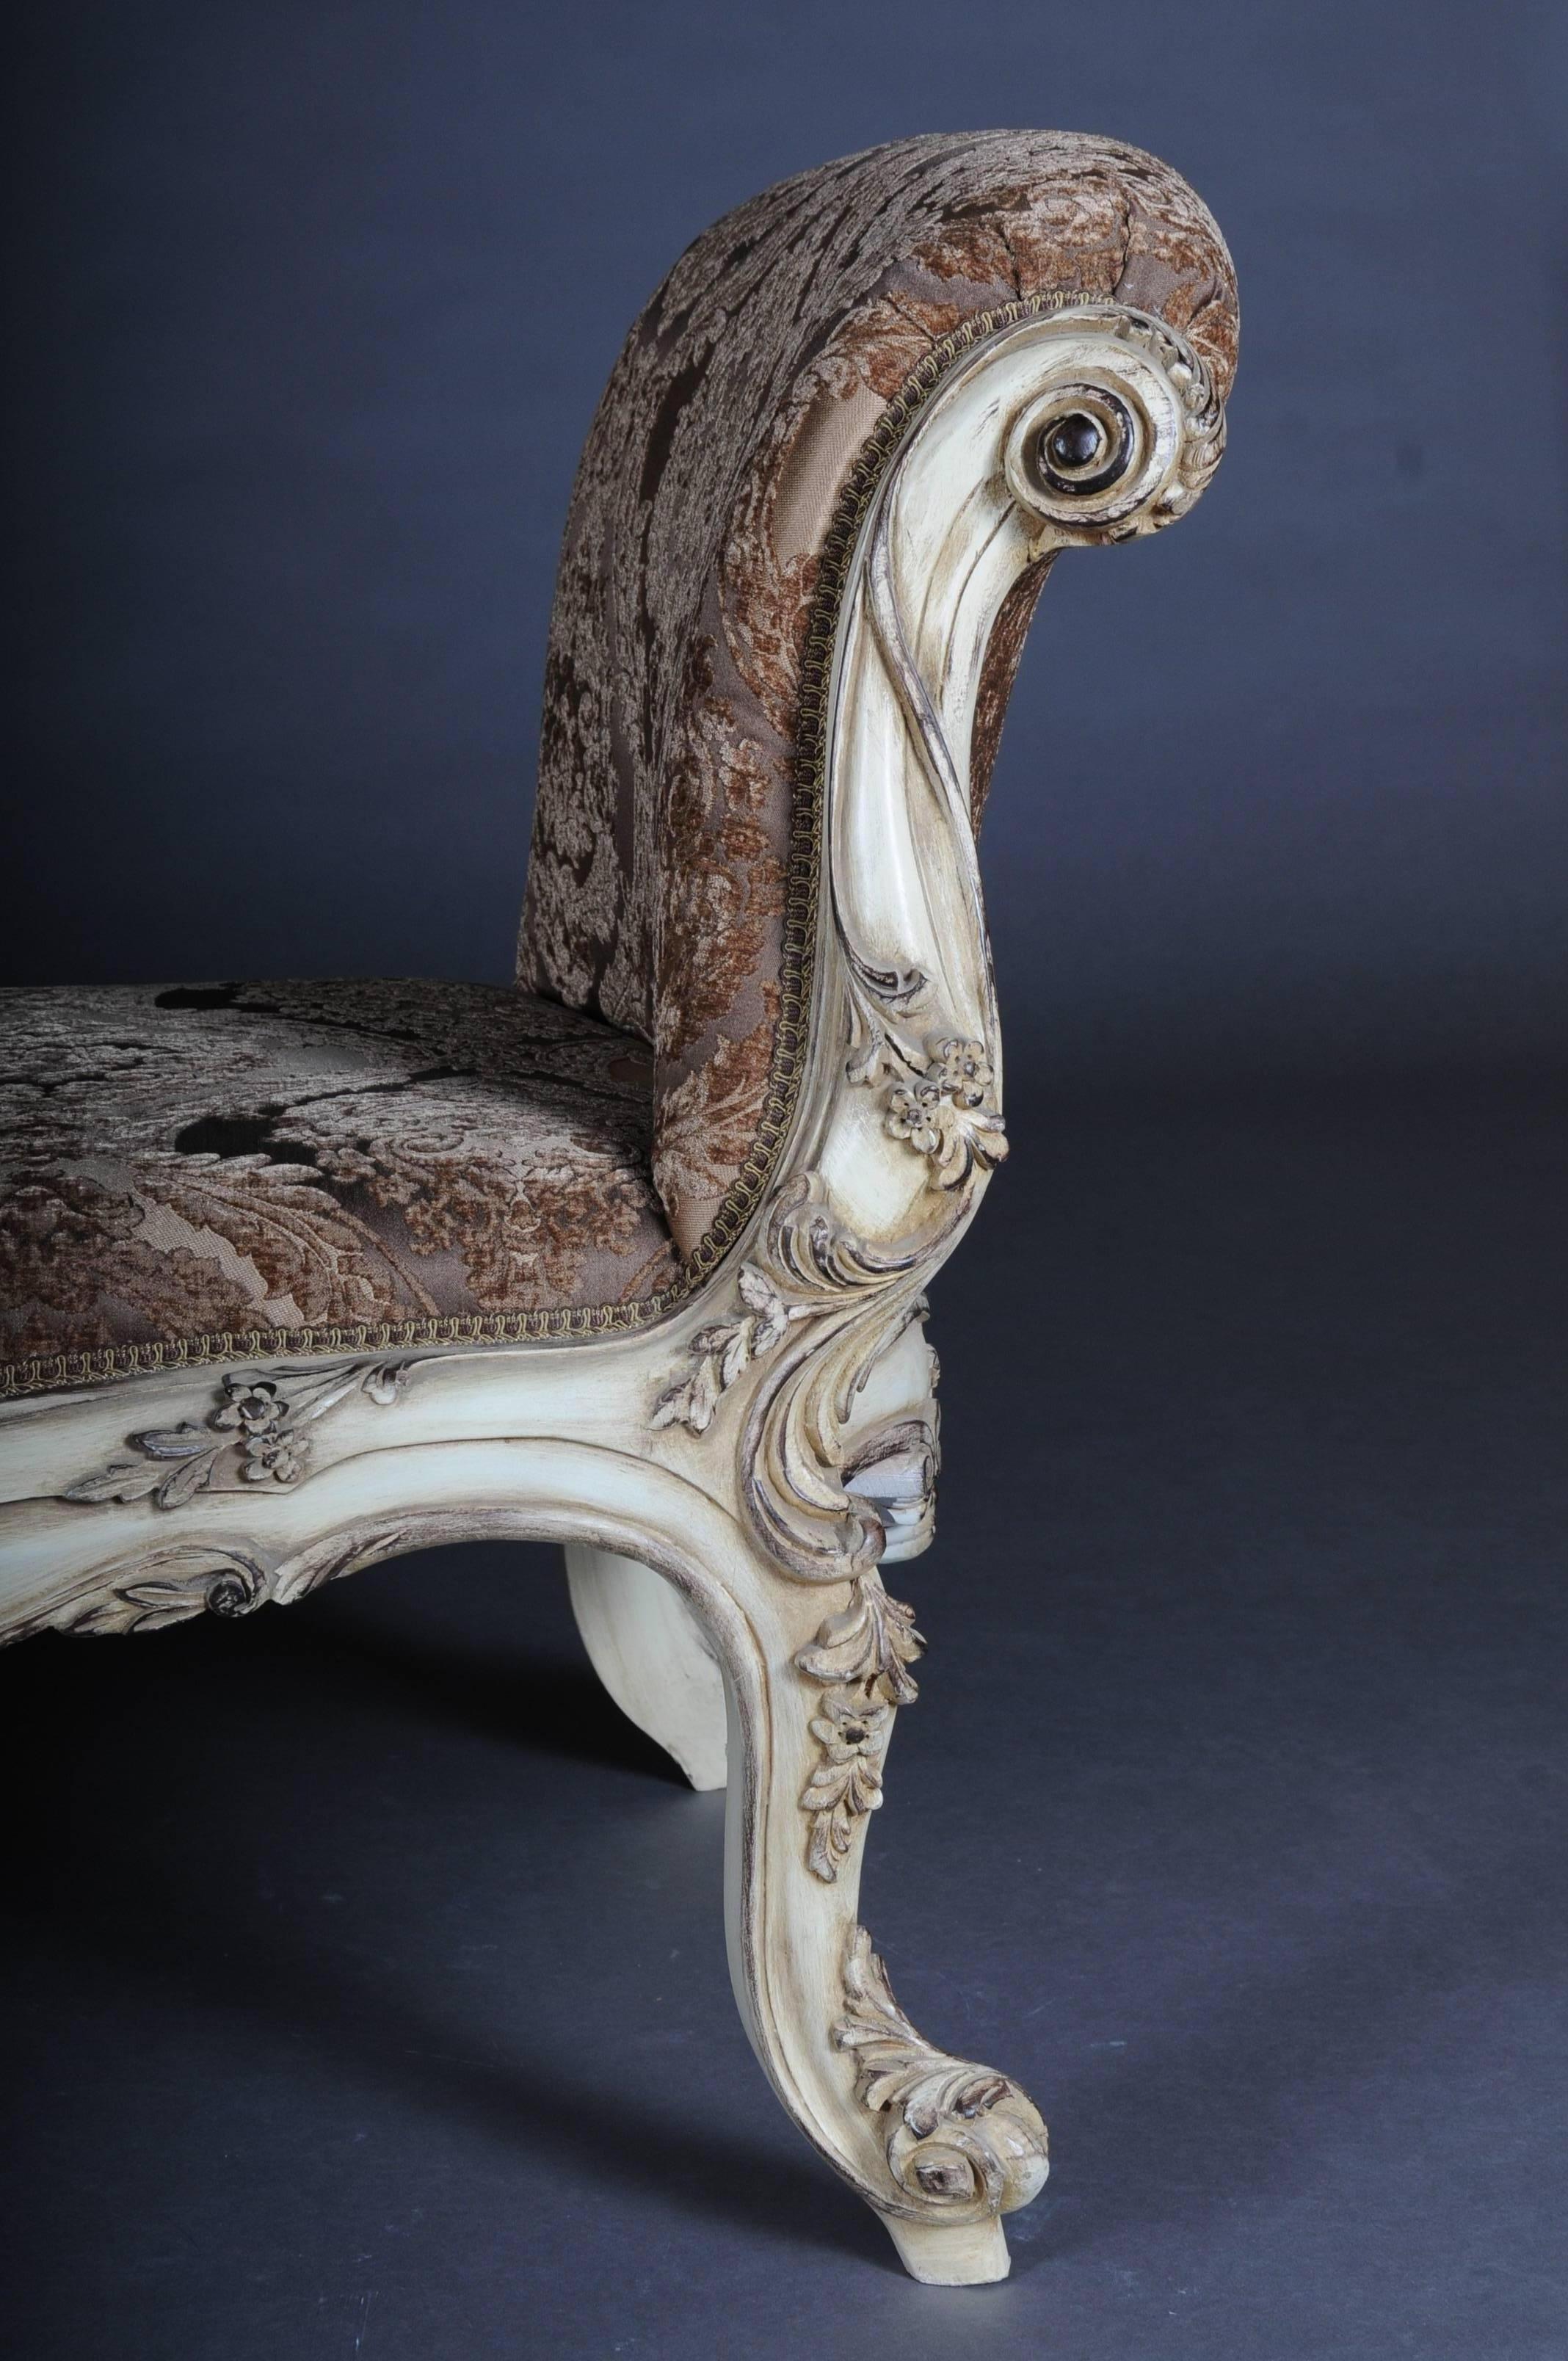 Solid beechwood, gilded with gold-plated trim, snug curly frame on four curved legs. The seat is finished with a historical, classic upholstery..